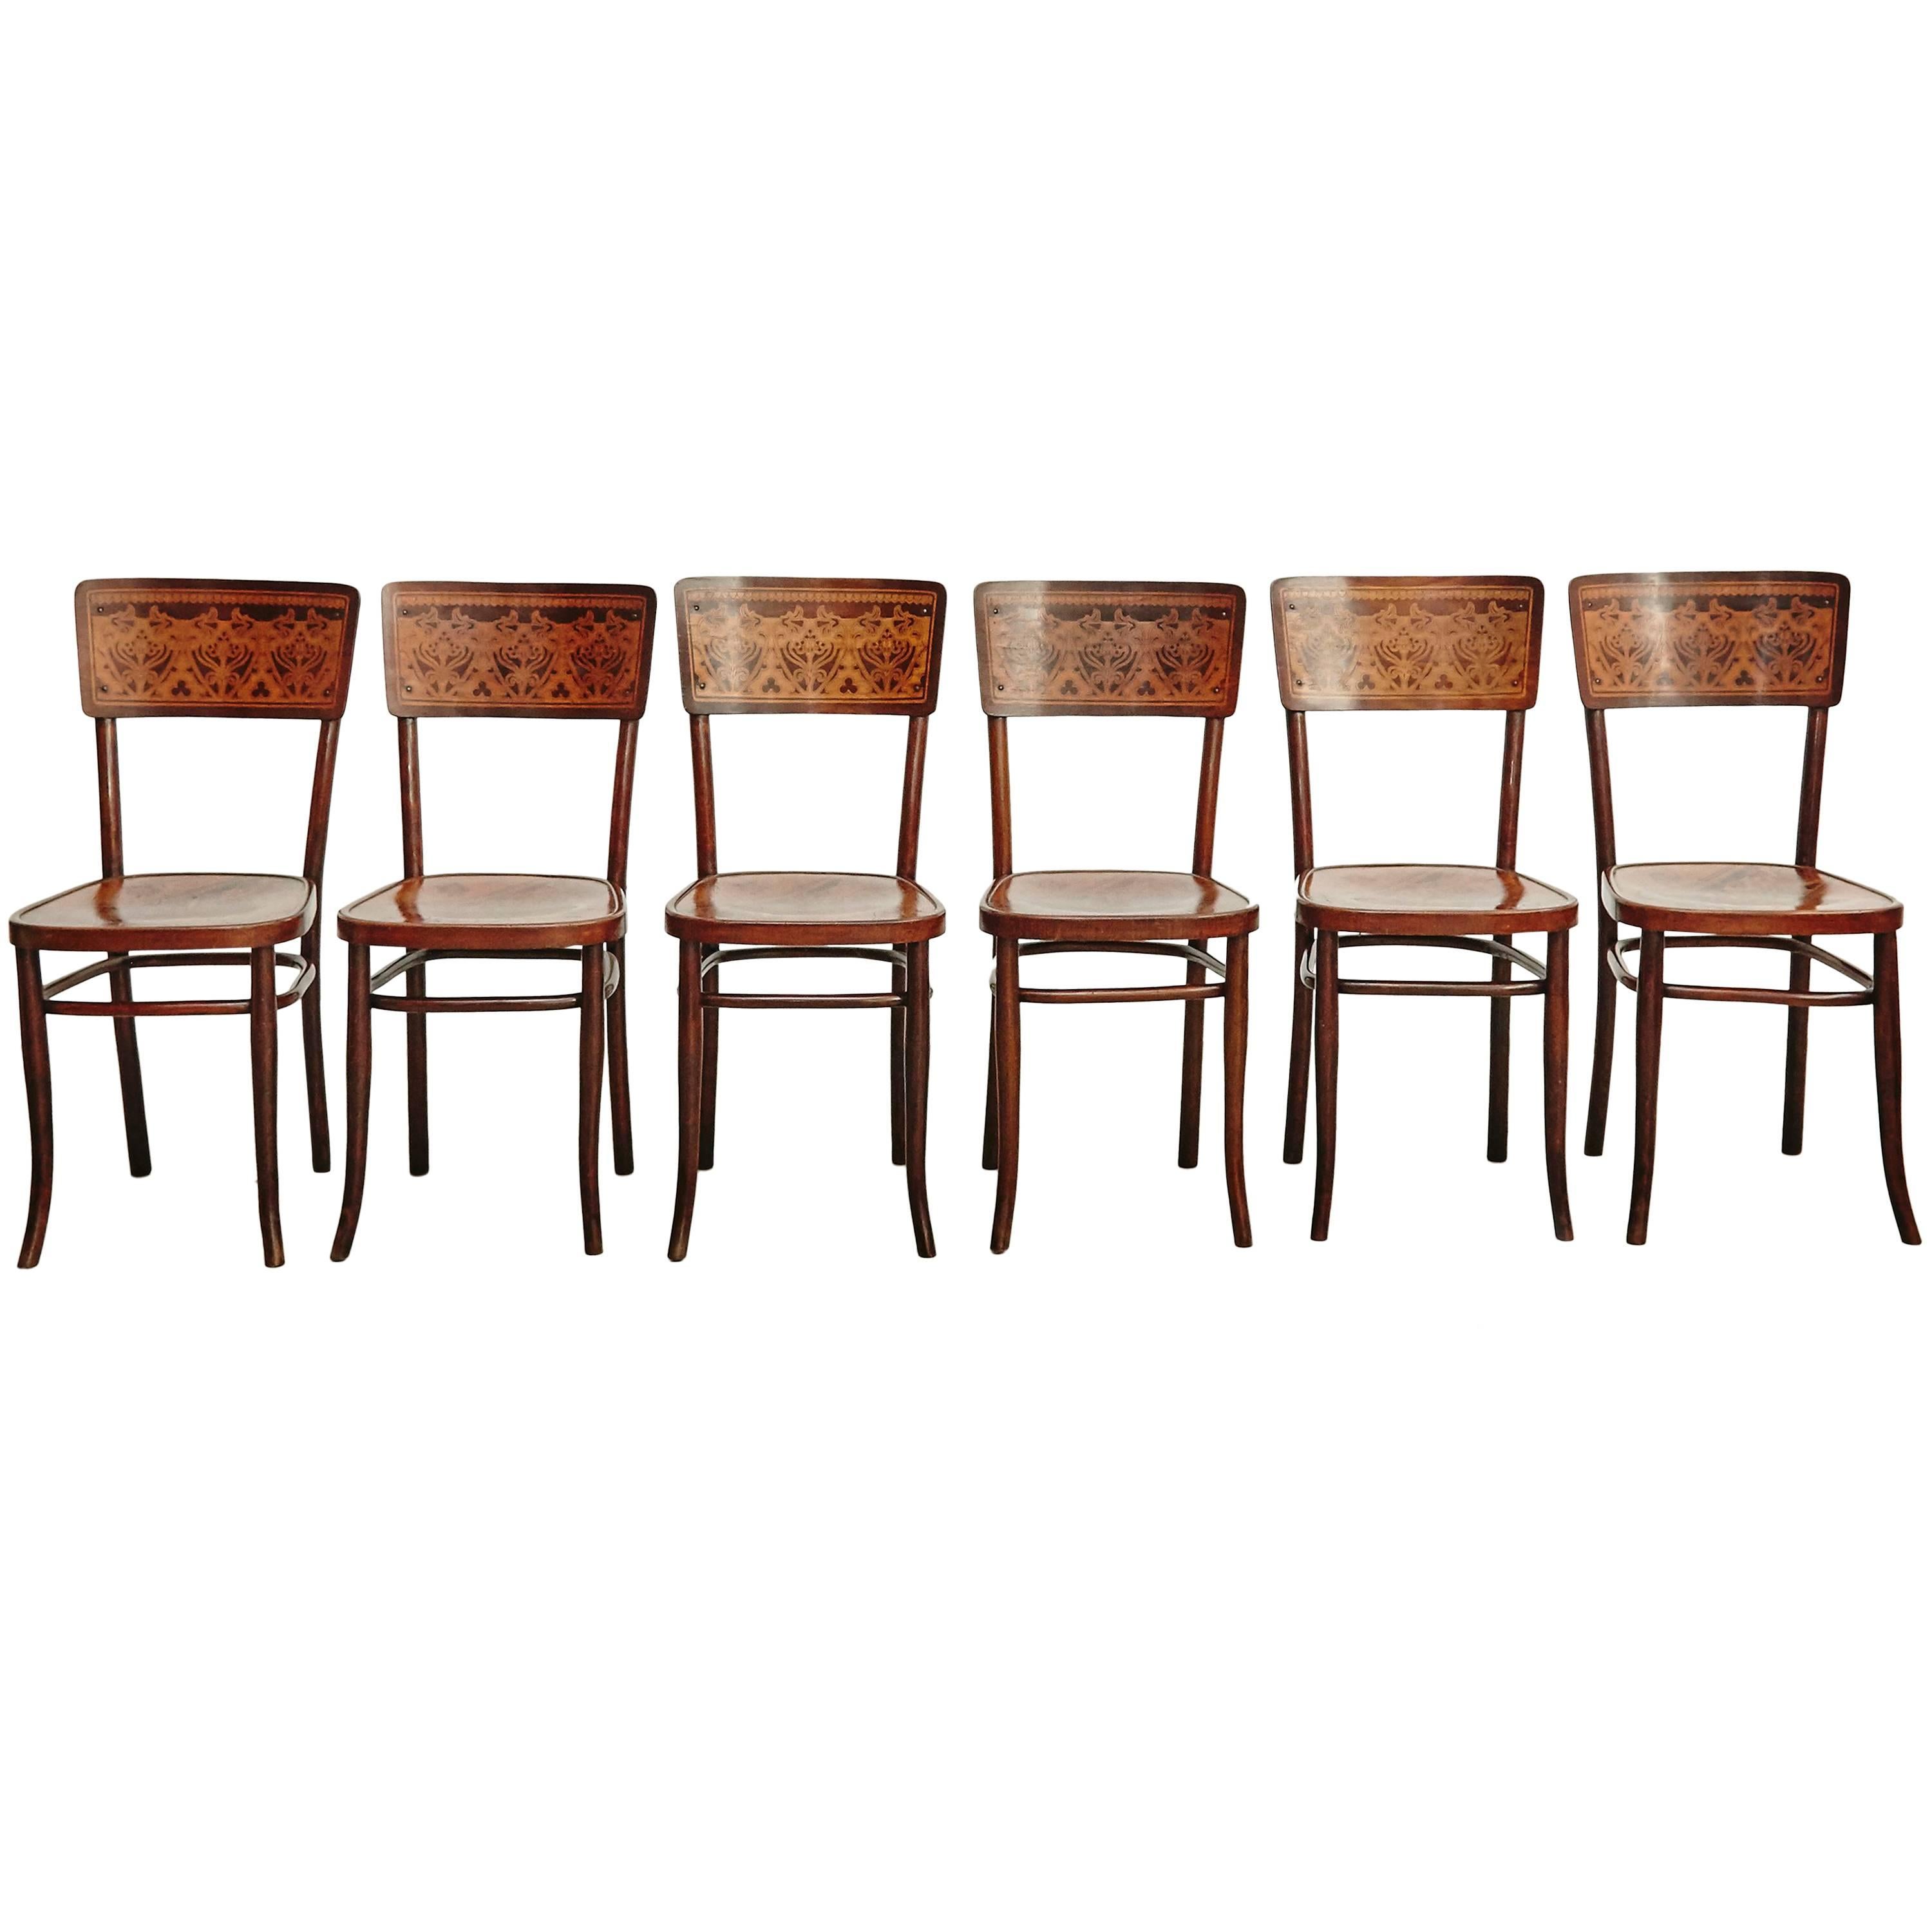 Set of Six Chairs by August Thonet for Thonet, circa 1900